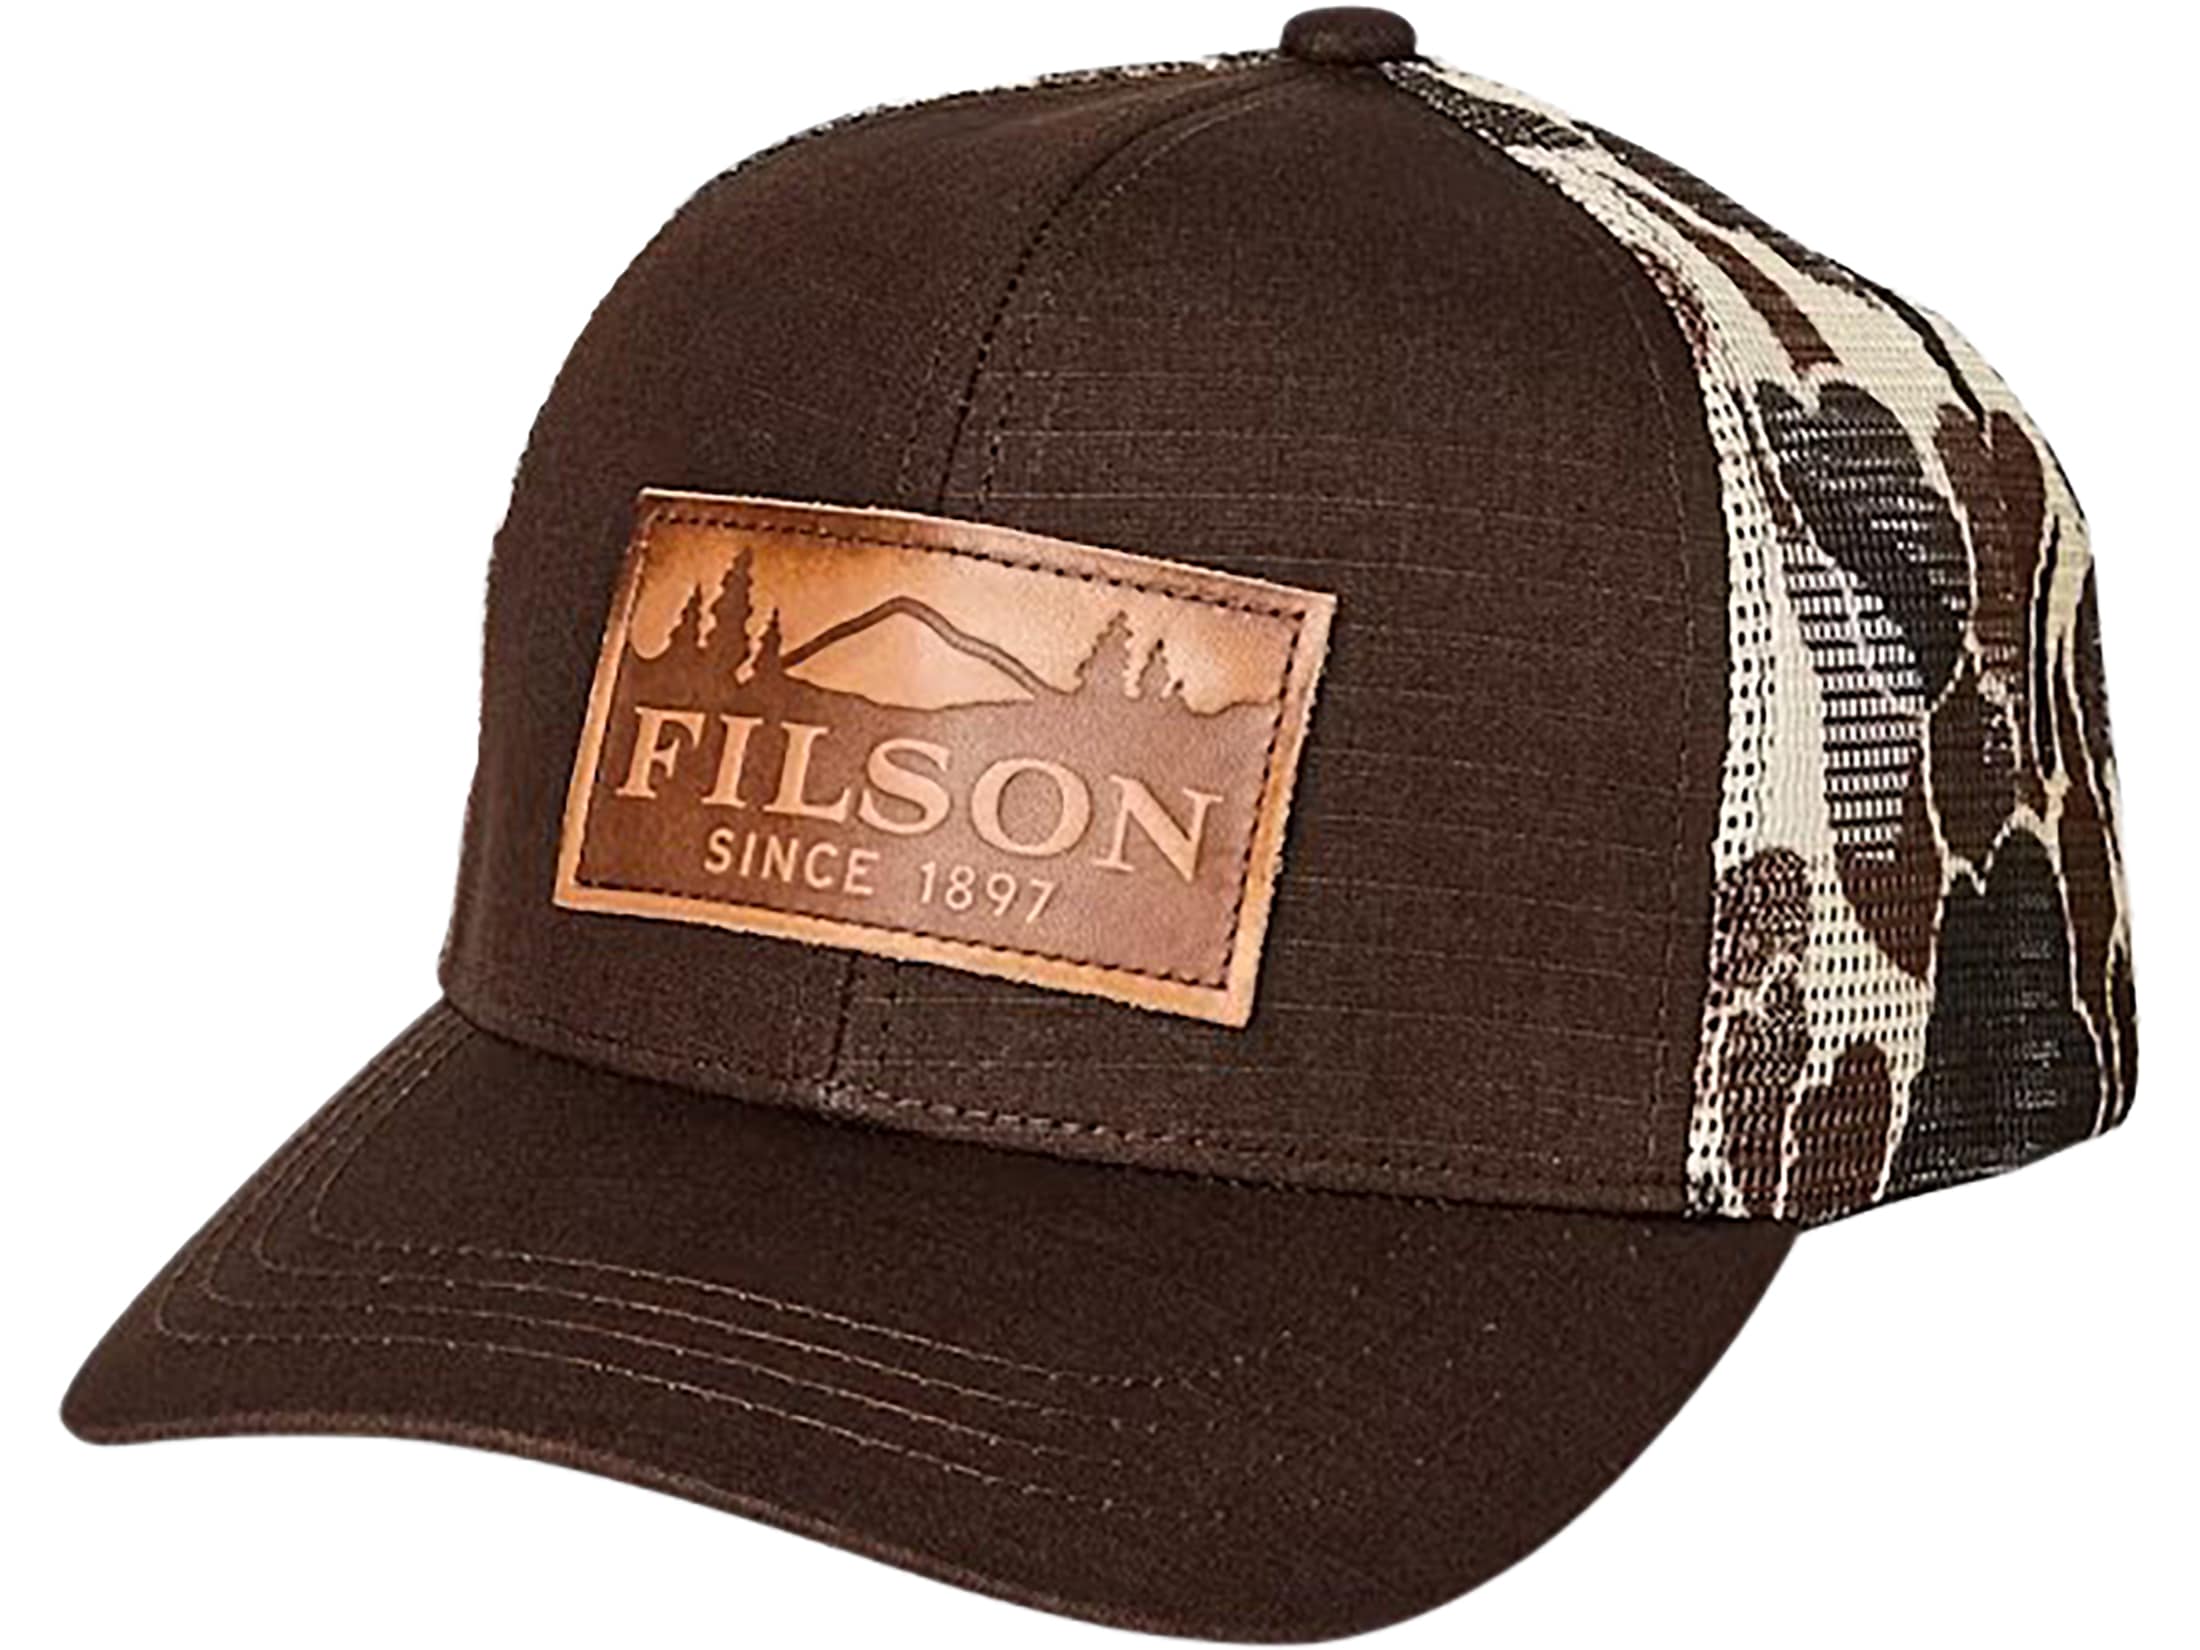 Filson Men's Logger Mesh Hat Brown Camo One Size Fits Most